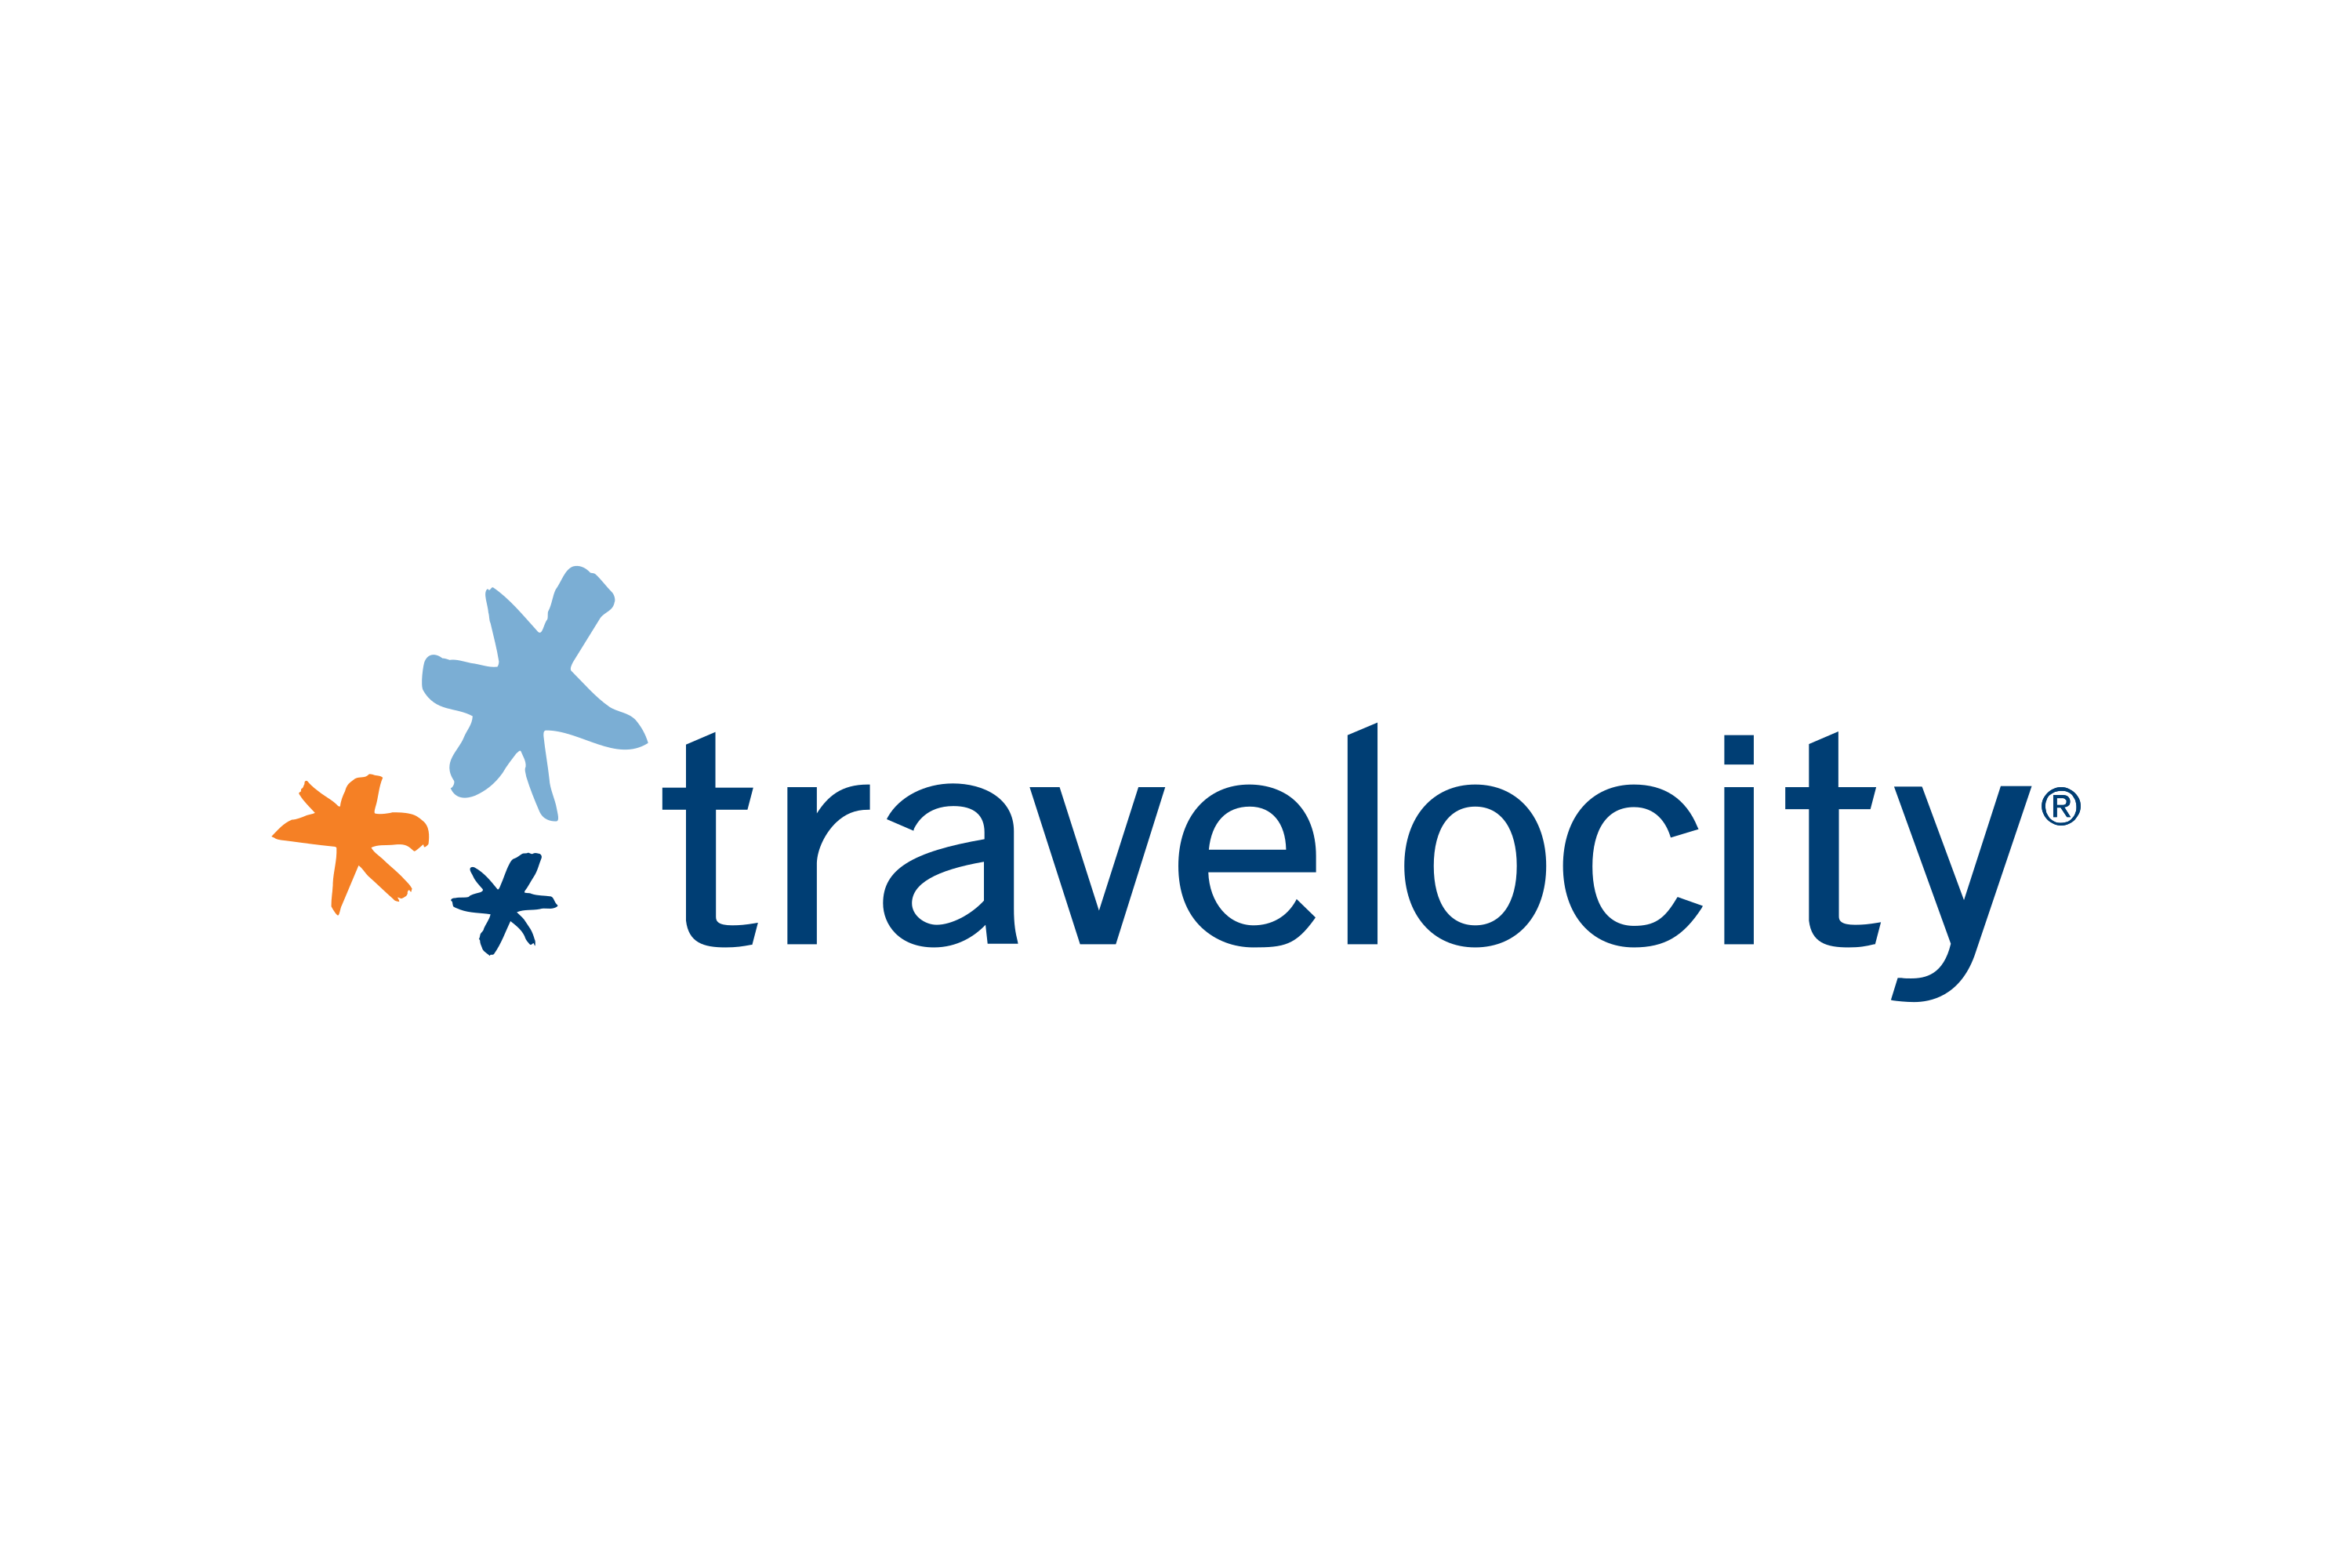 Travelocity Logo - Free download logo in SVG or PNG format